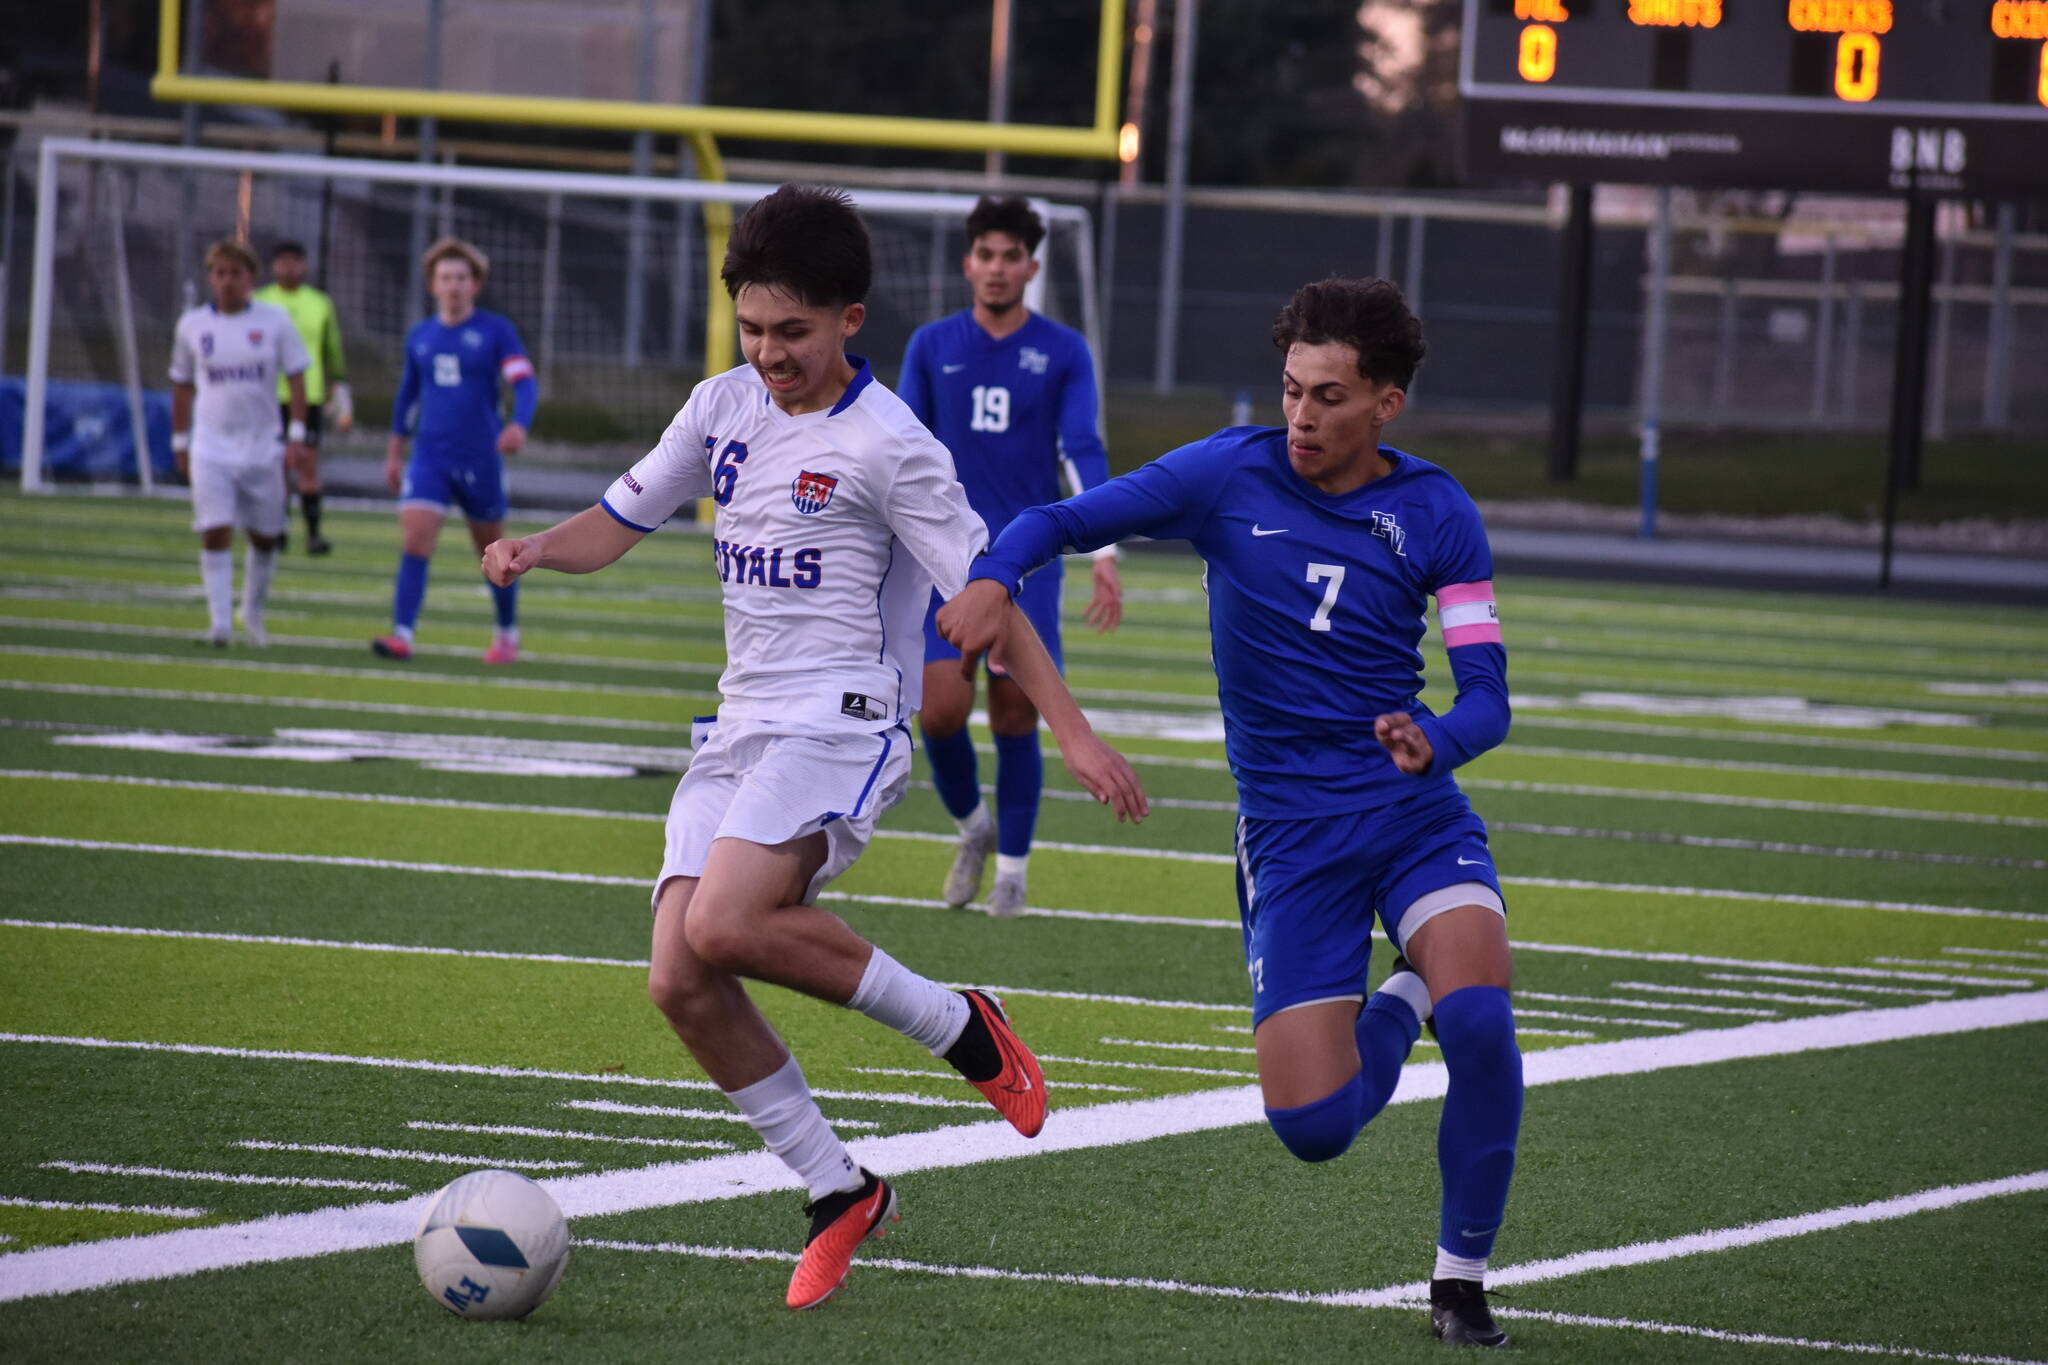 Goal scorer Gabriel Dizon chases down the ball on a hunt for possession. Ben Ray / The Mirror